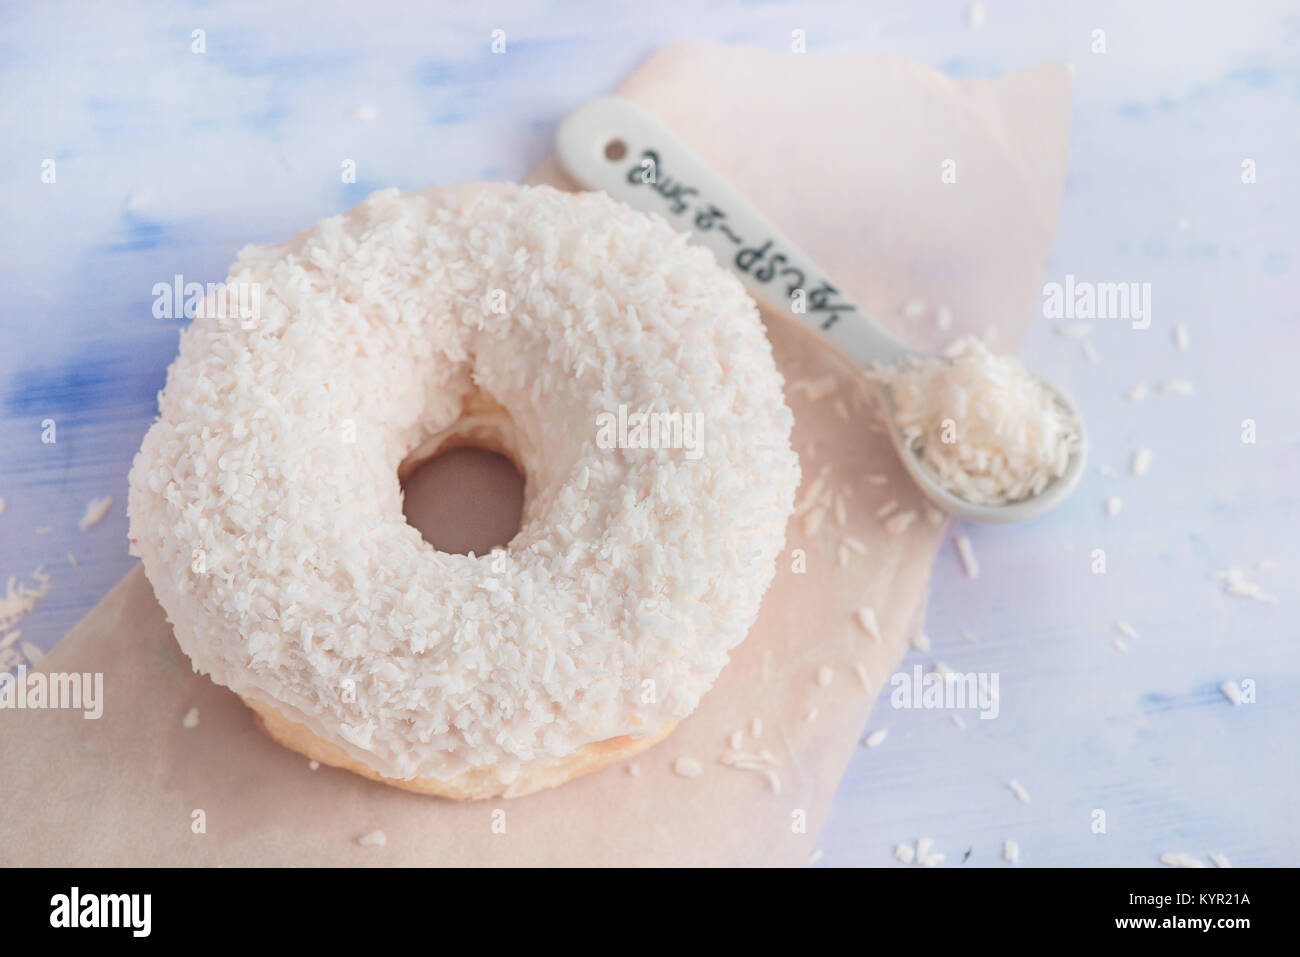 Close-up of a white donut with coconut topping on a light background. High key food photography. Stock Photo